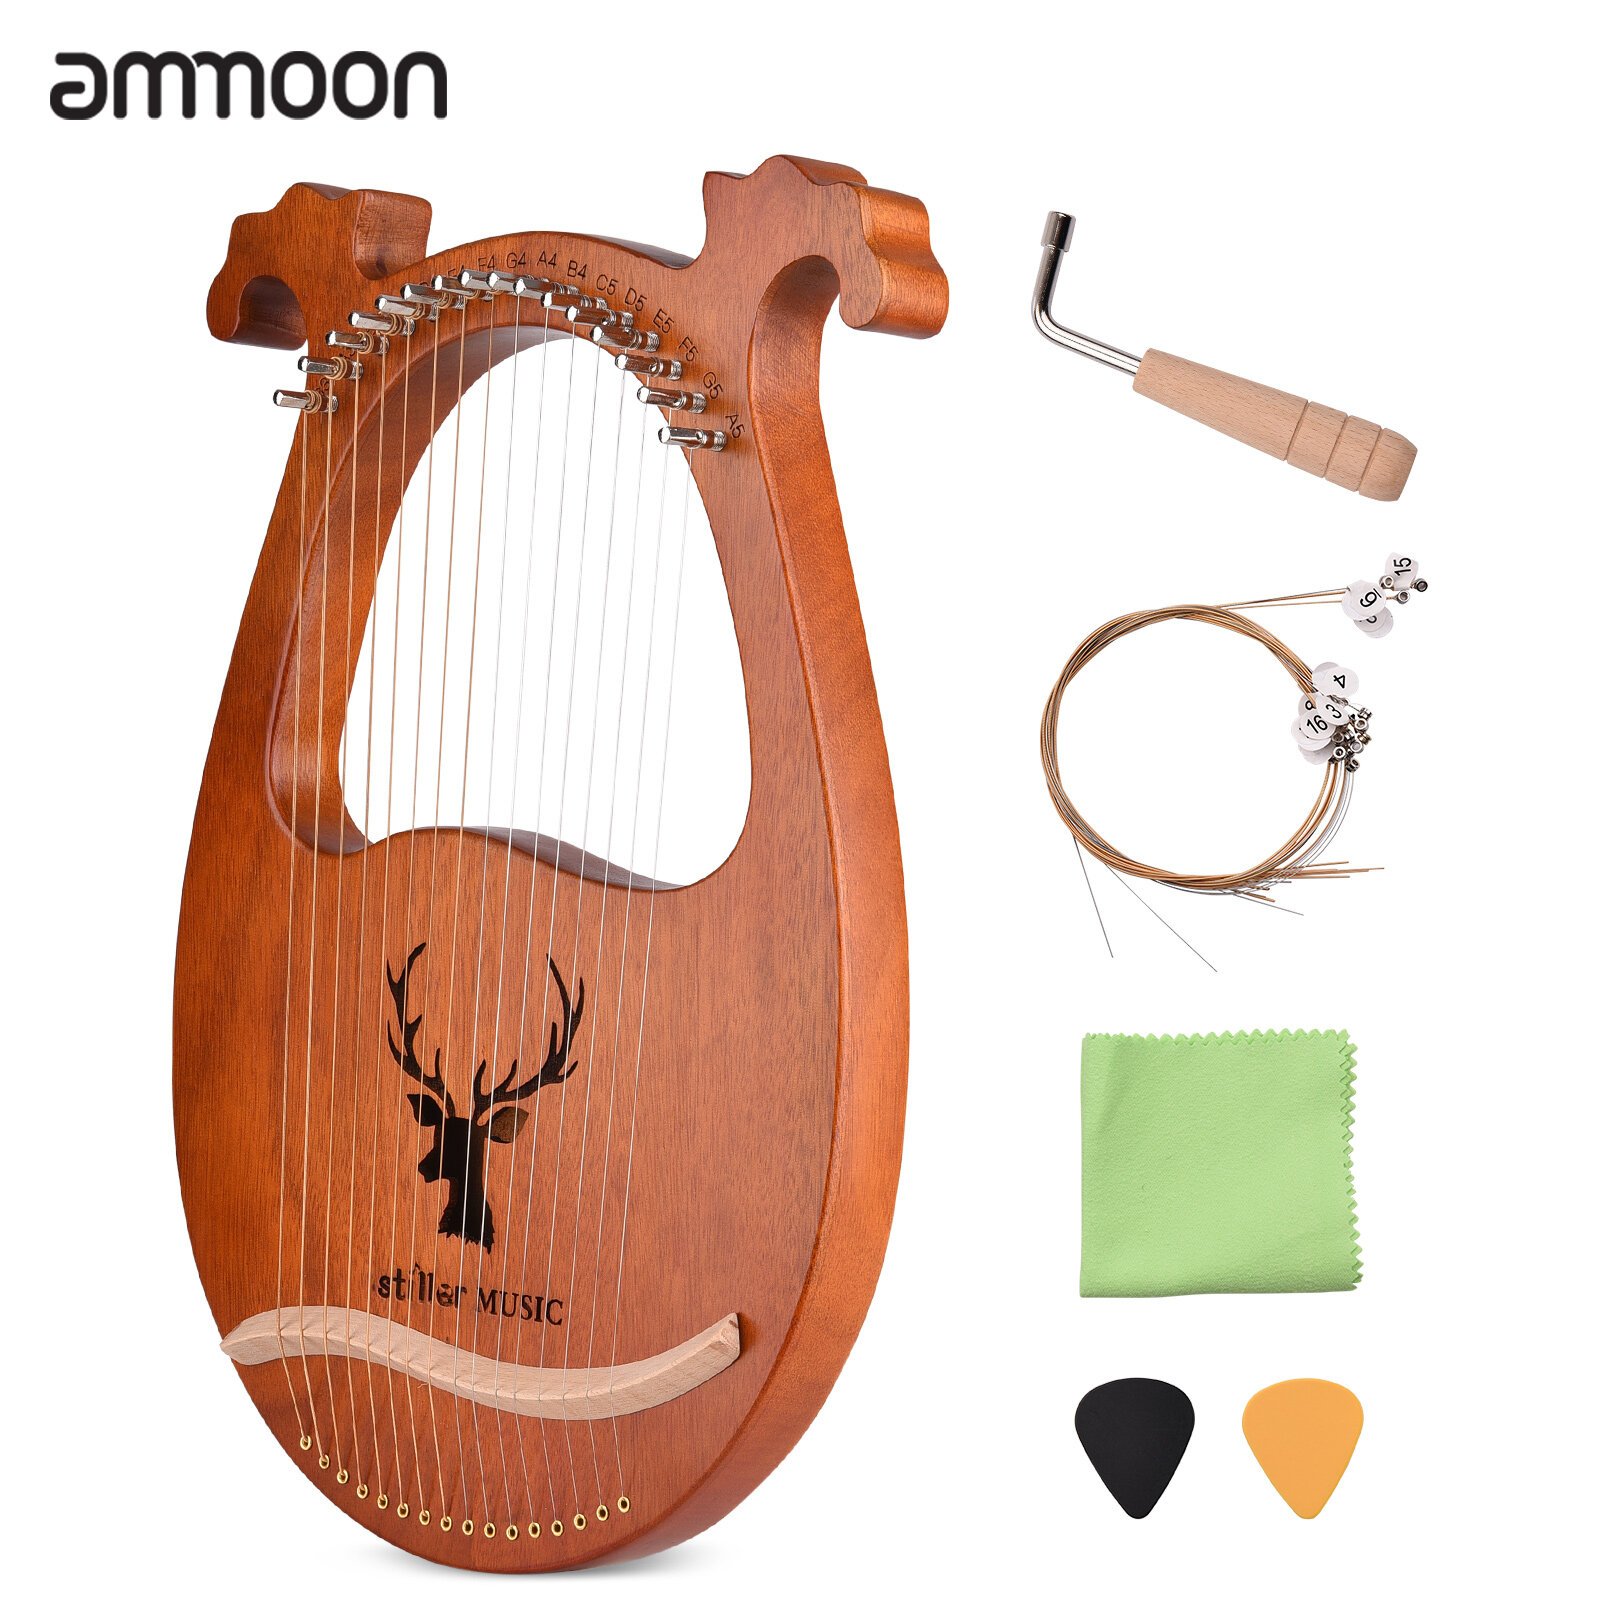 letra función toma una foto ammoon 16 String Lyre Harp Solid Wood String Instrument with Elk Pattern  Tuning Hammer Strings Cleaning Cloth Picks for Beginners | Lazada